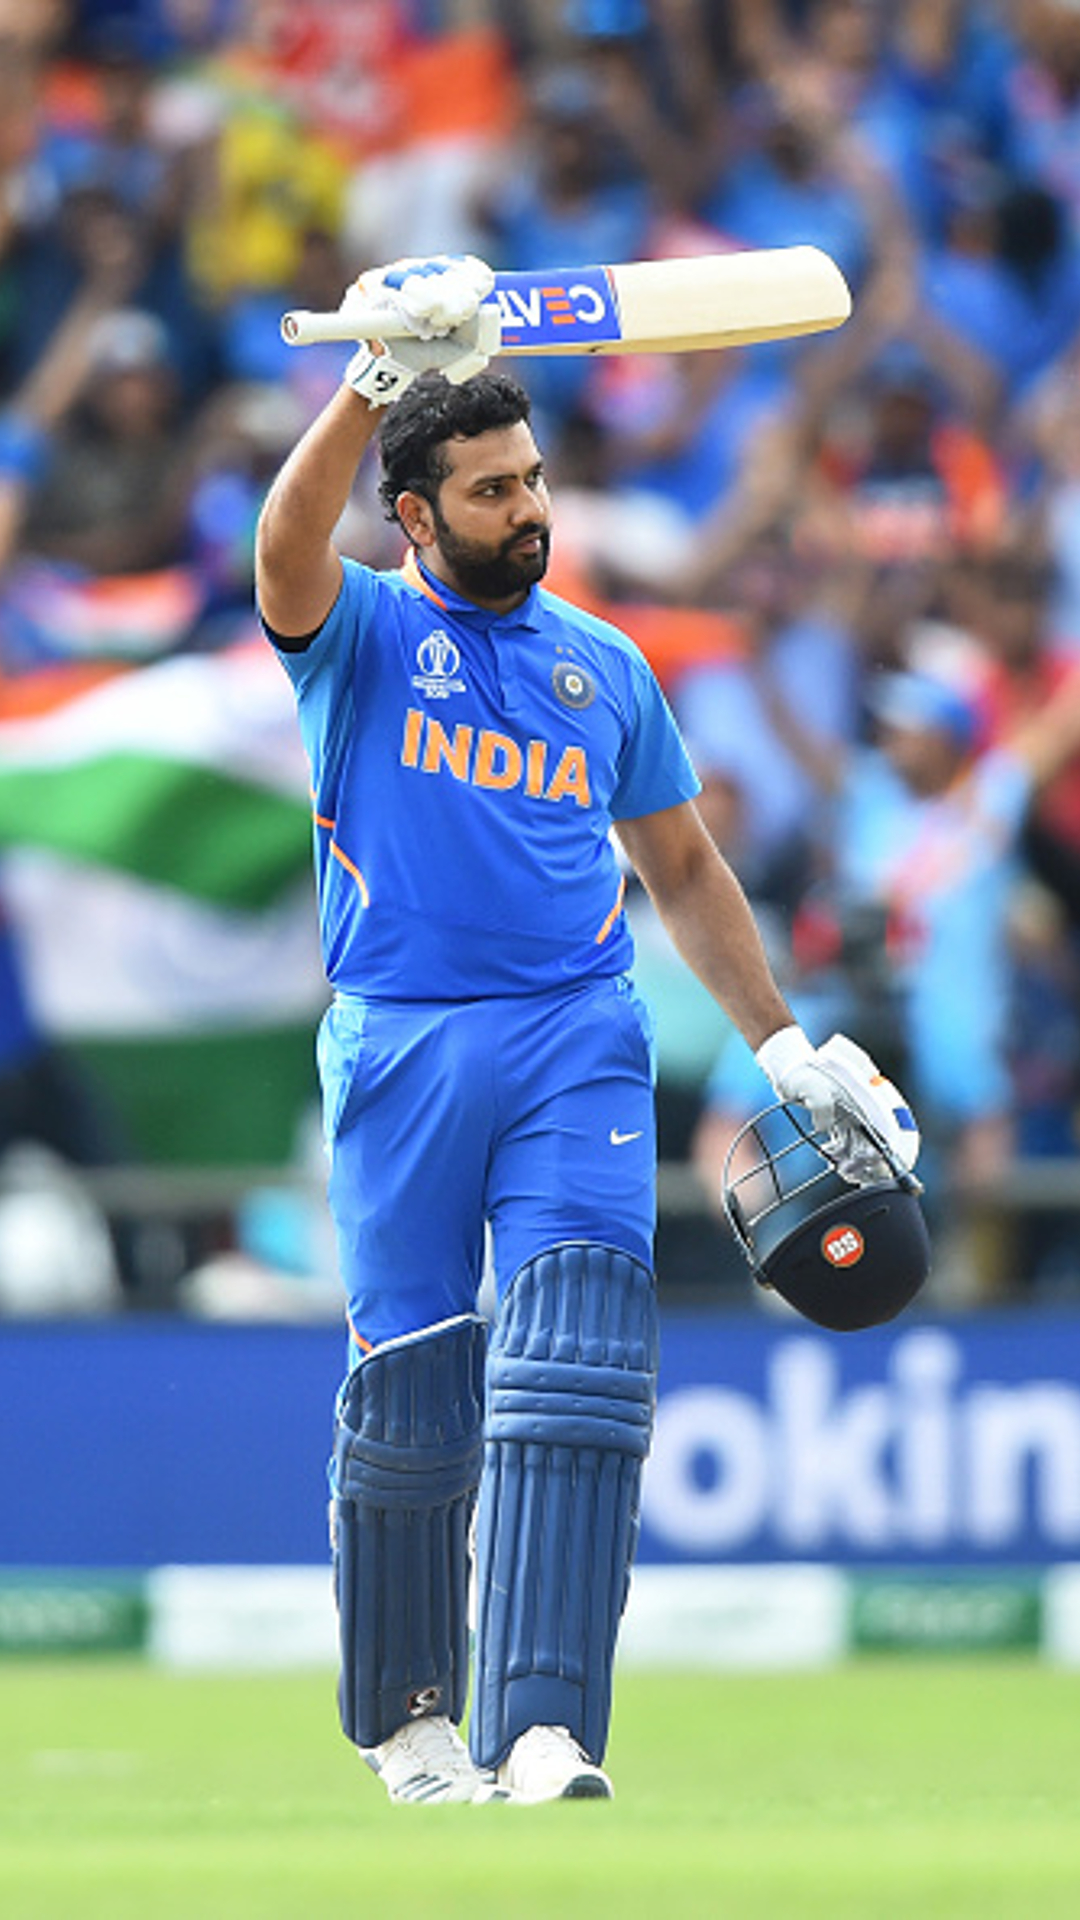 Rohit Sharma broke MS Dhoni's record of hitting most ODI sixes in India. Here's entire list.